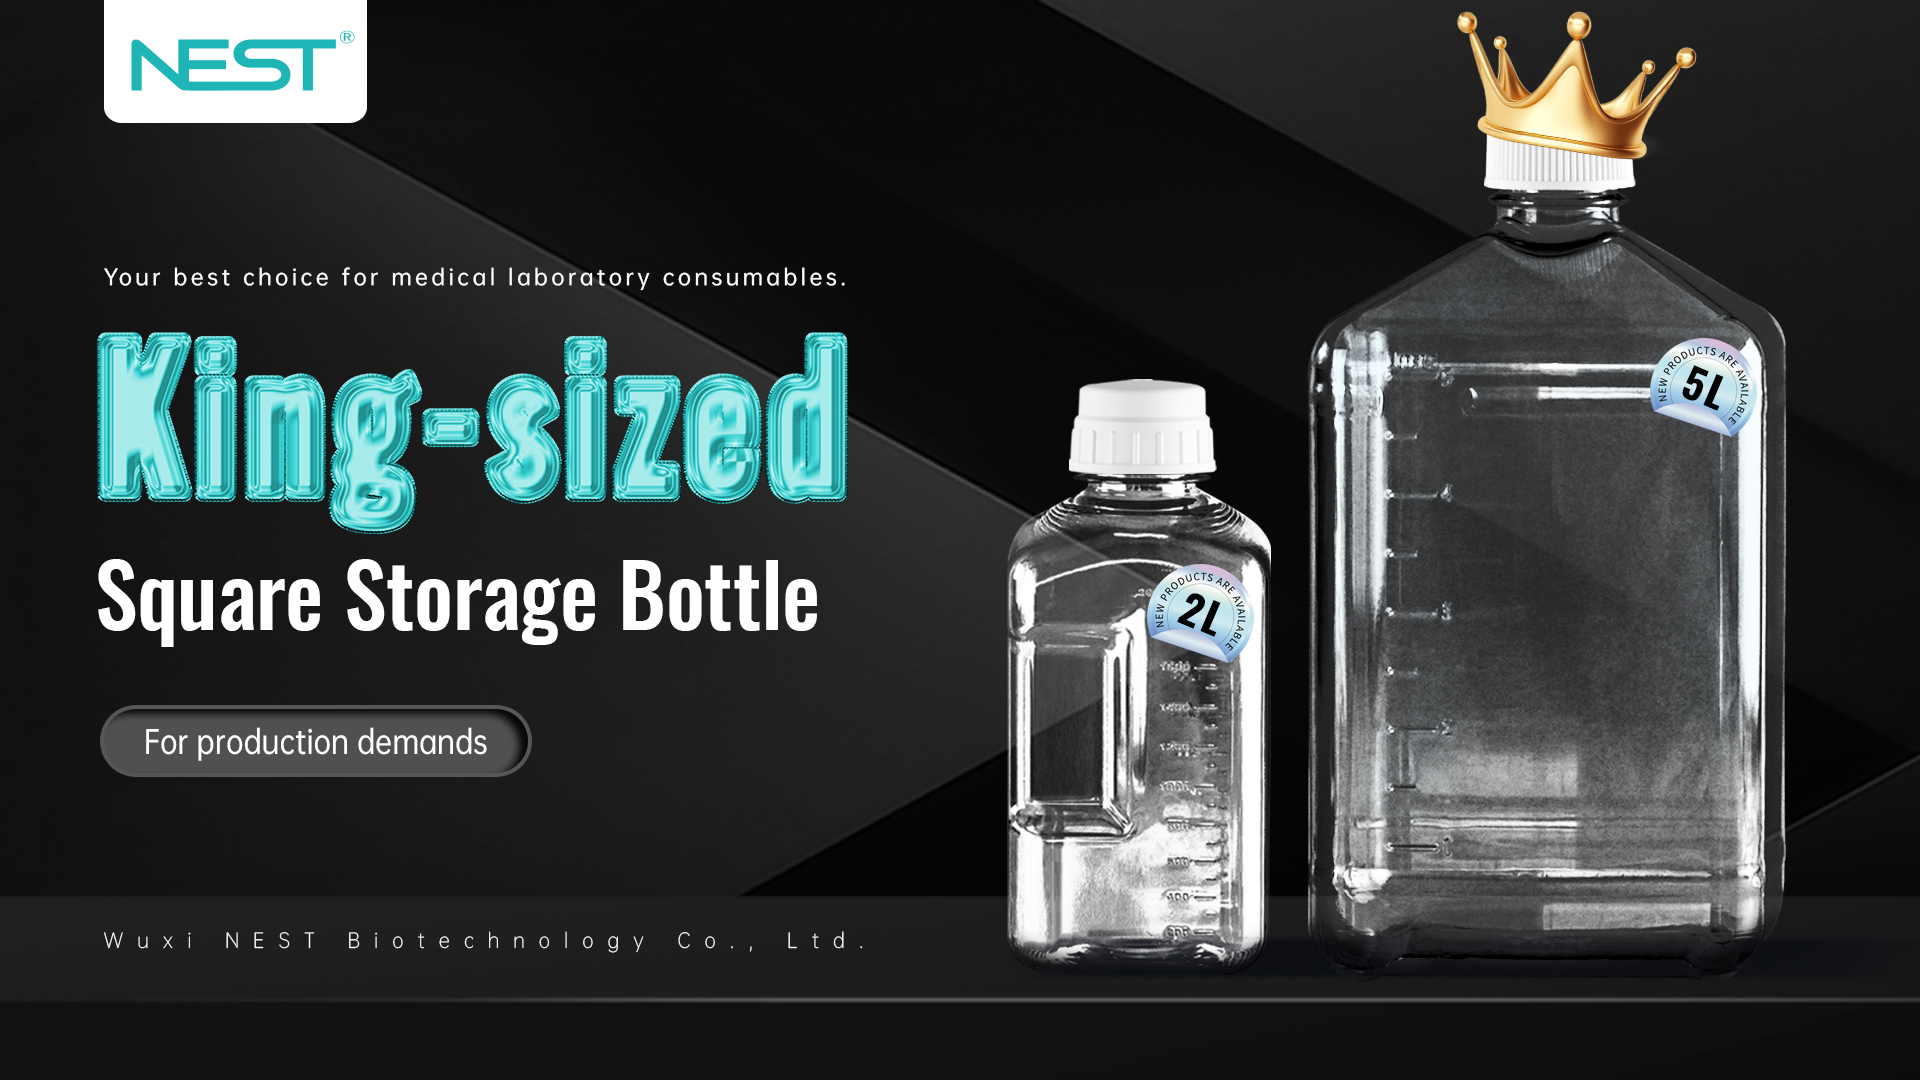 King-sized Square Storage Bottle, an innovative and versatile addition